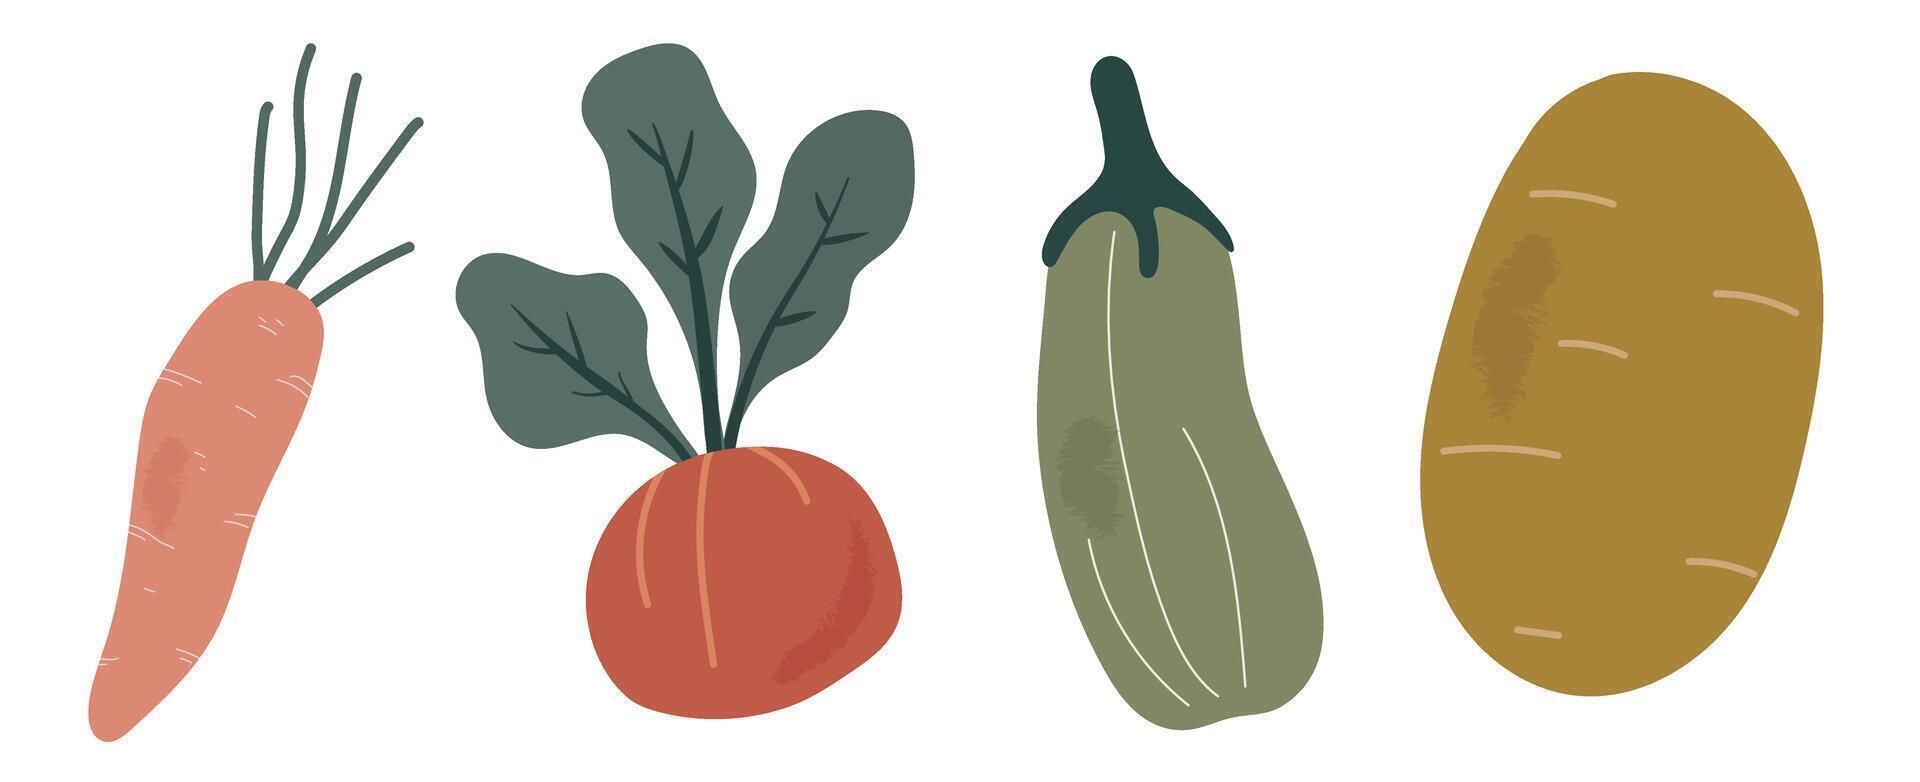 Set of Vegetables Graphic Illustration, Produce from the Garden, Harvest Vegetable Clipart, Graphic Illustration vector